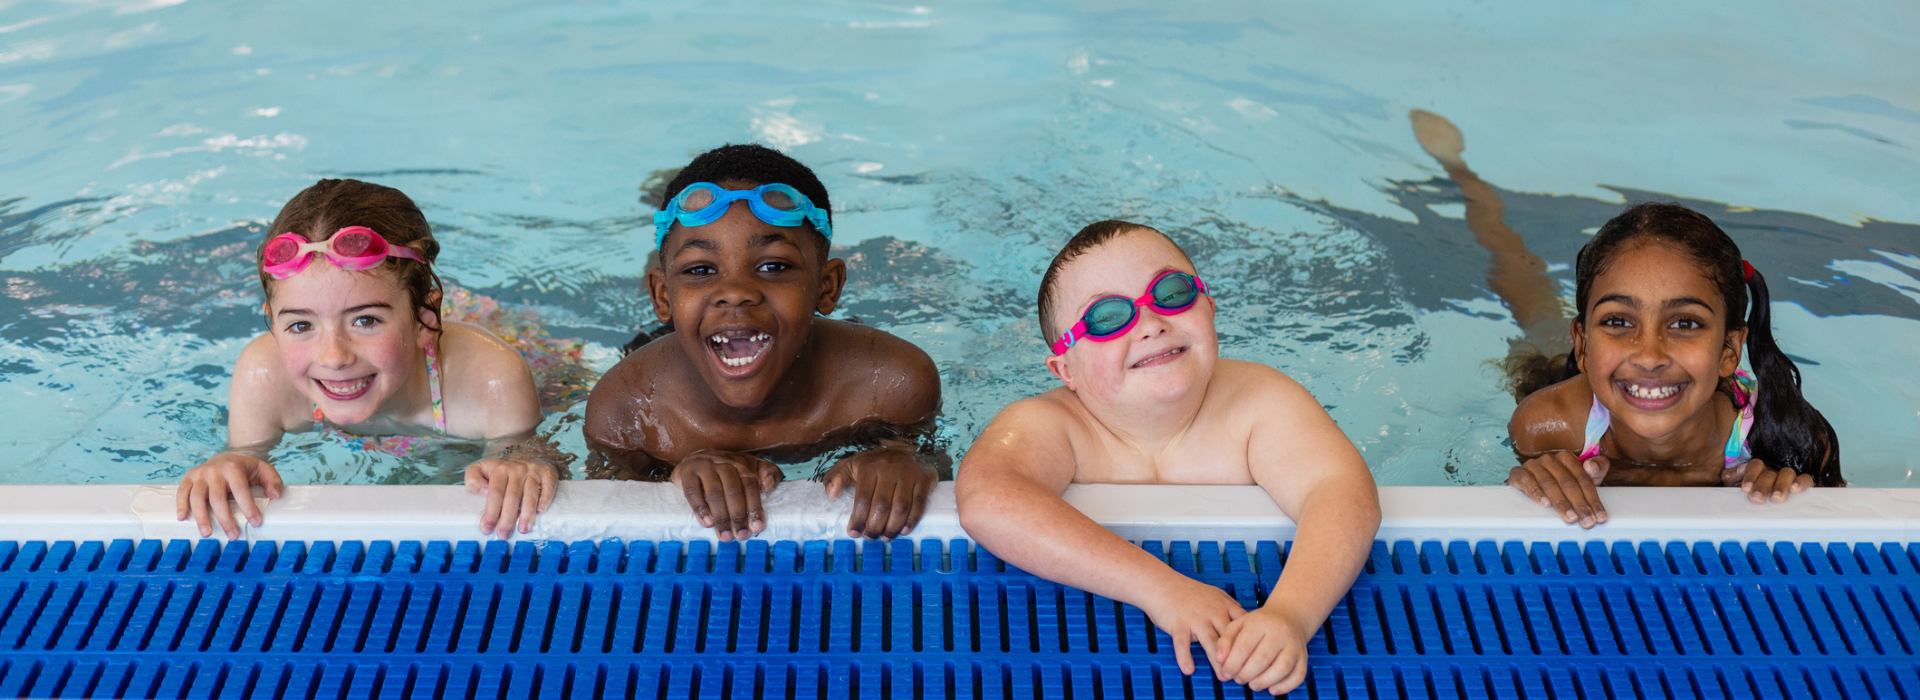 kids at the edge of a pool at swim lessons smiling